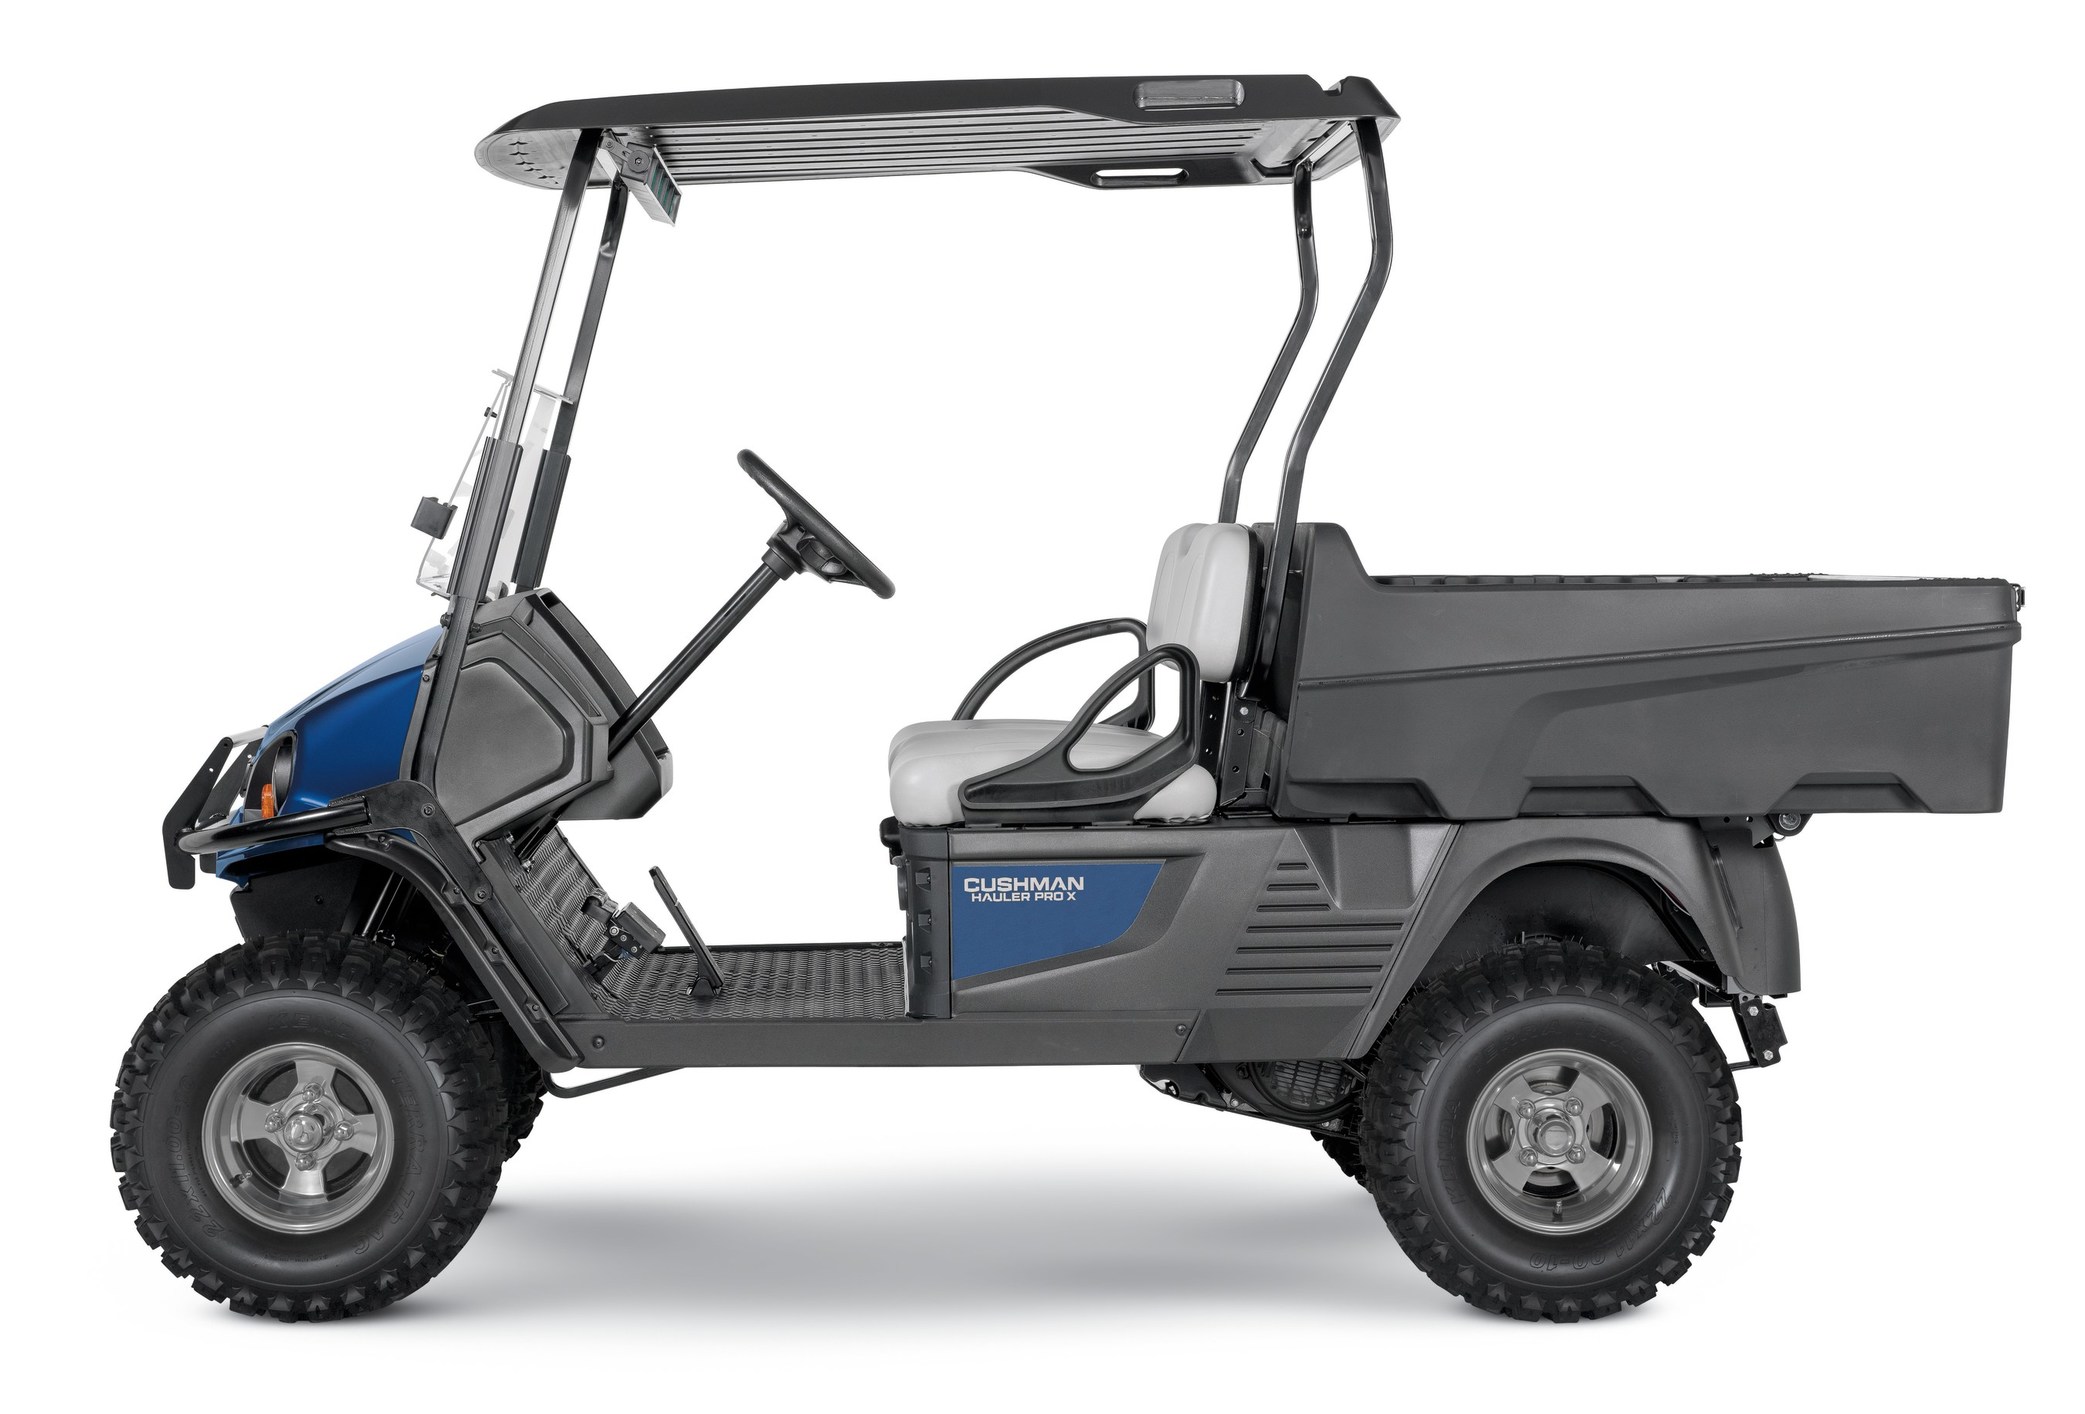 Cushman® Hauler® Utility Vehicle Named Among Top 100 Products of 2016